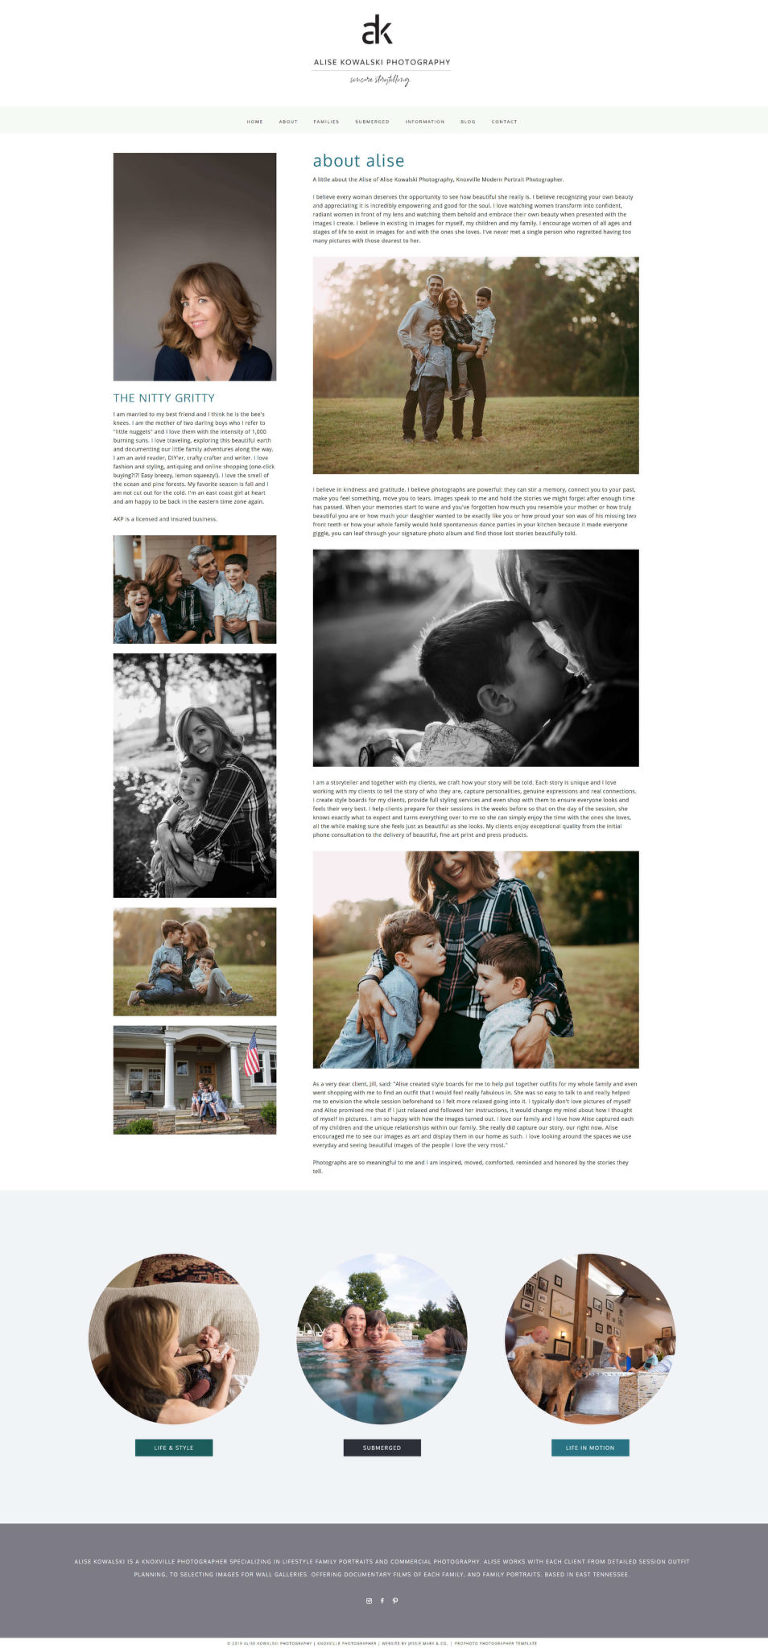 Pro Photo designer Jessie Mary & Co created this custom website for Knoxville photographer Alise - about the artist